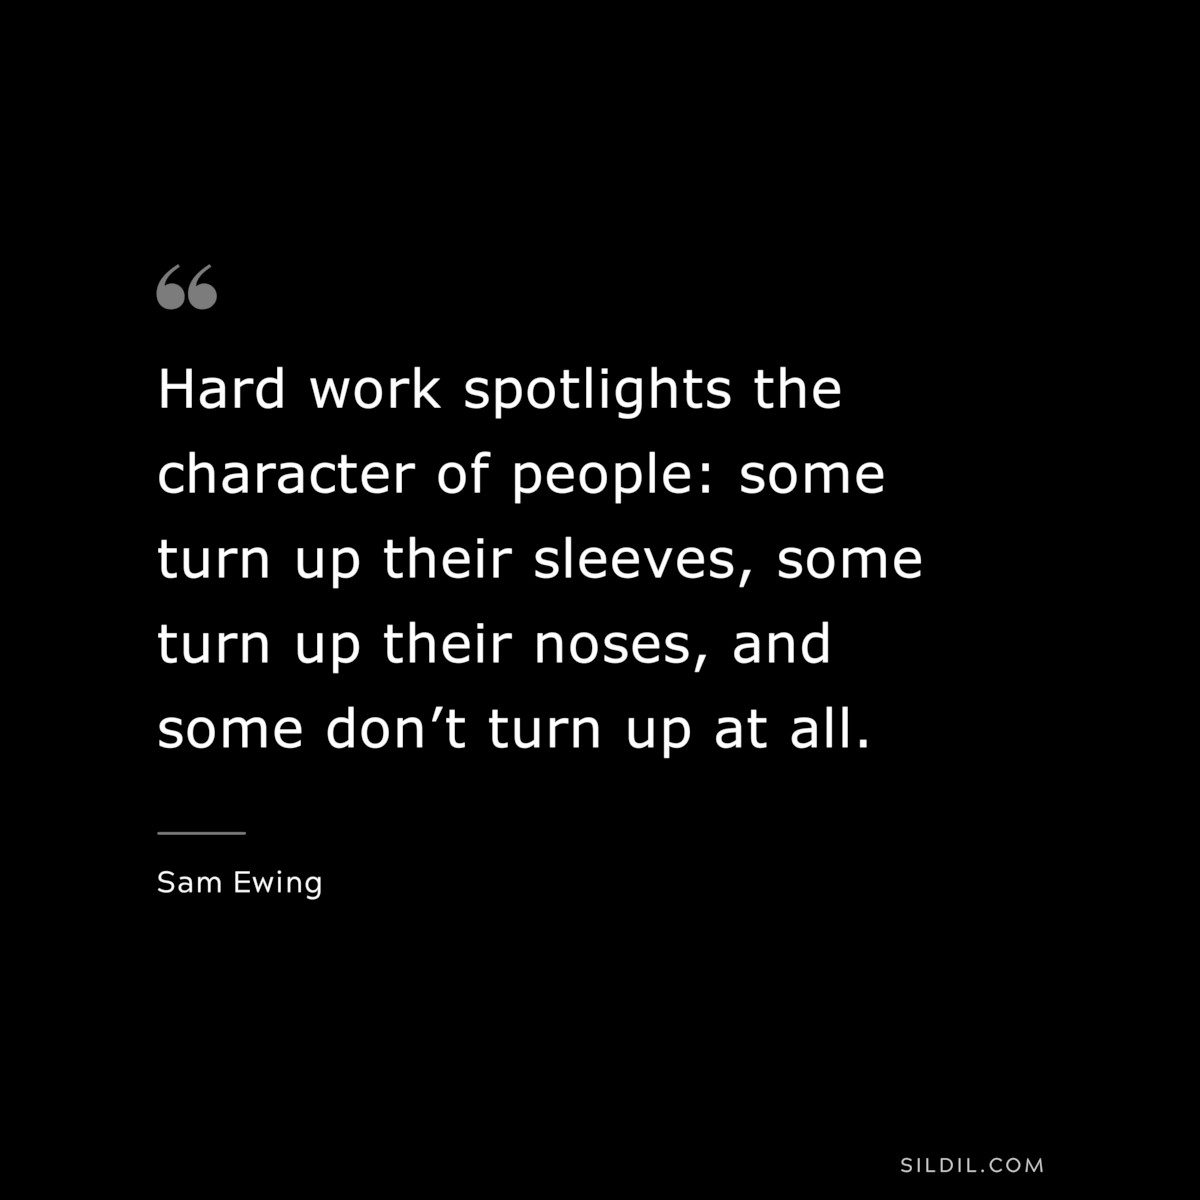 Hard work spotlights the character of people: some turn up their sleeves, some turn up their noses, and some don’t turn up at all. ― Sam Ewing